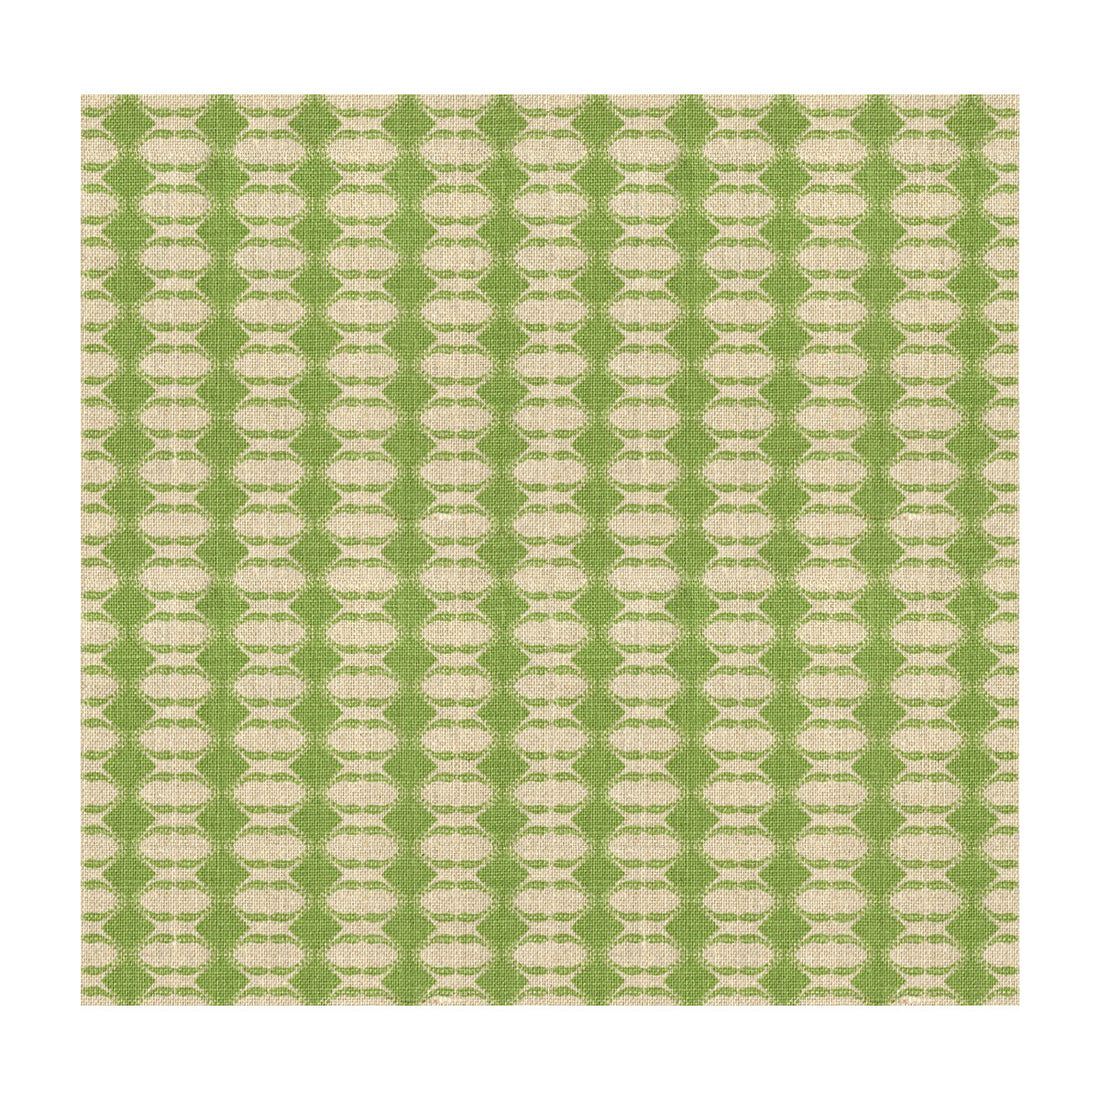 Diamond fabric in meadow color - pattern GWF-3507.3.0 - by Lee Jofa Modern in the Allegra Hicks Garden collection